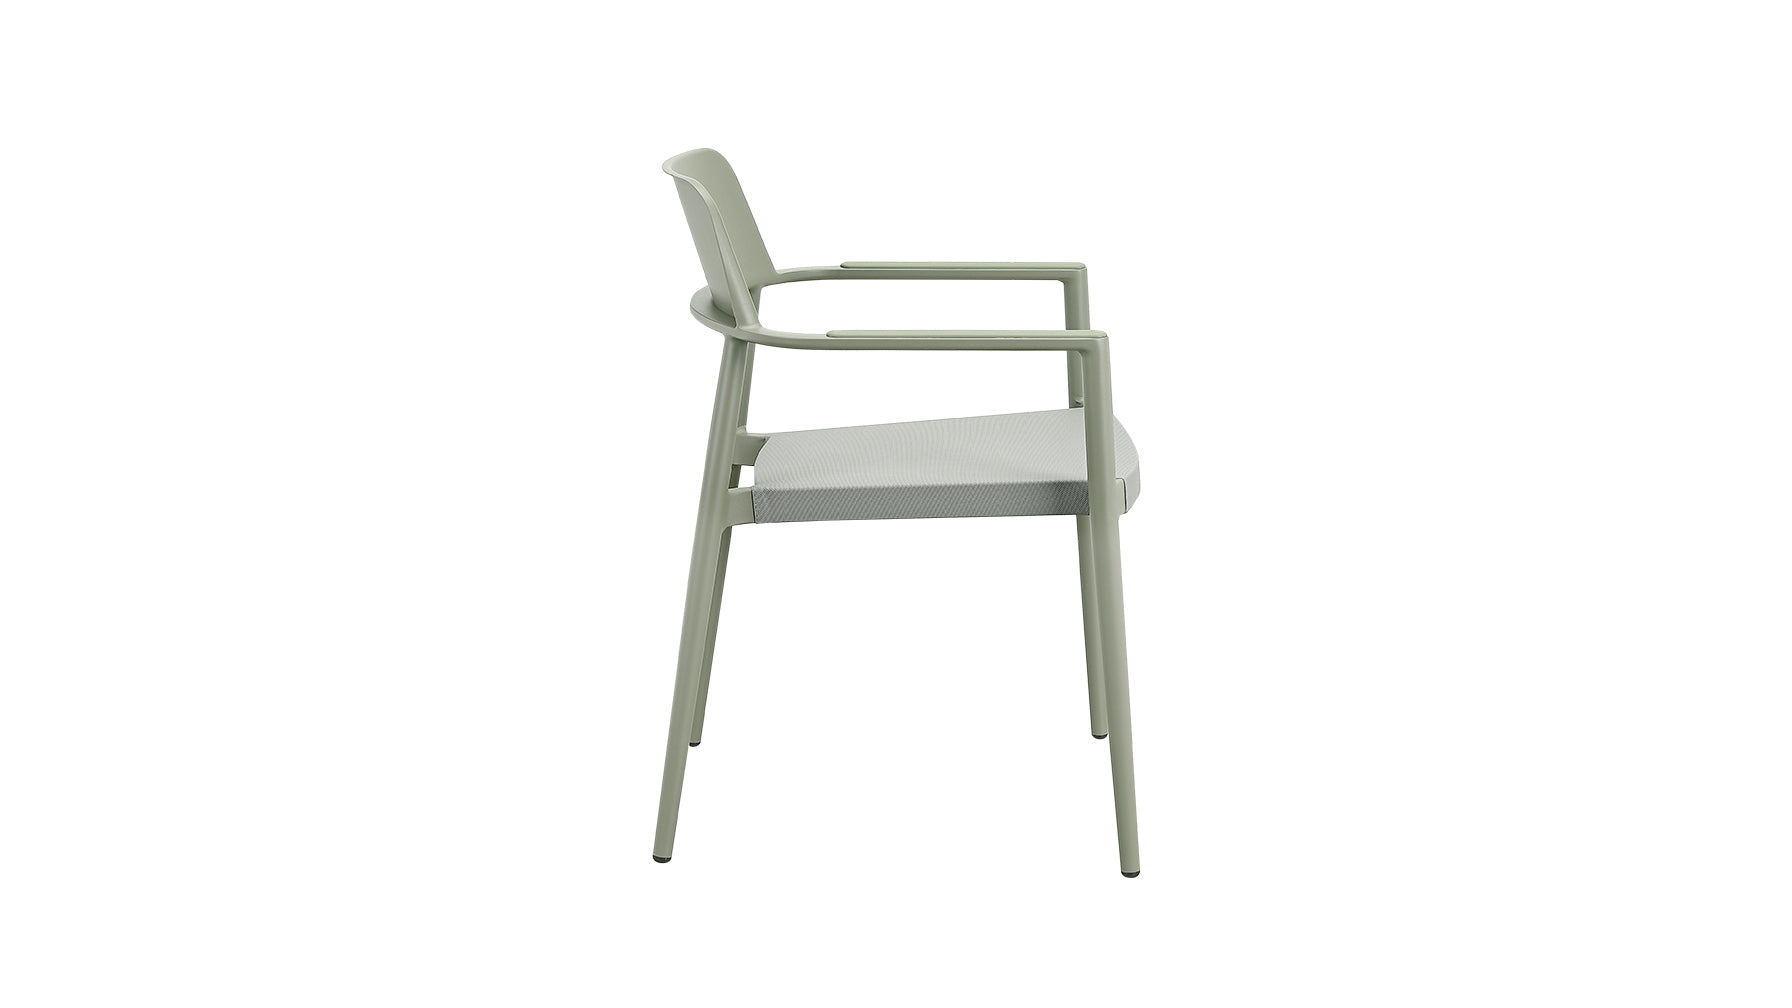 Best Of Me Outdoor Dining Chair (Set of Two), Olive Grey - Image 6